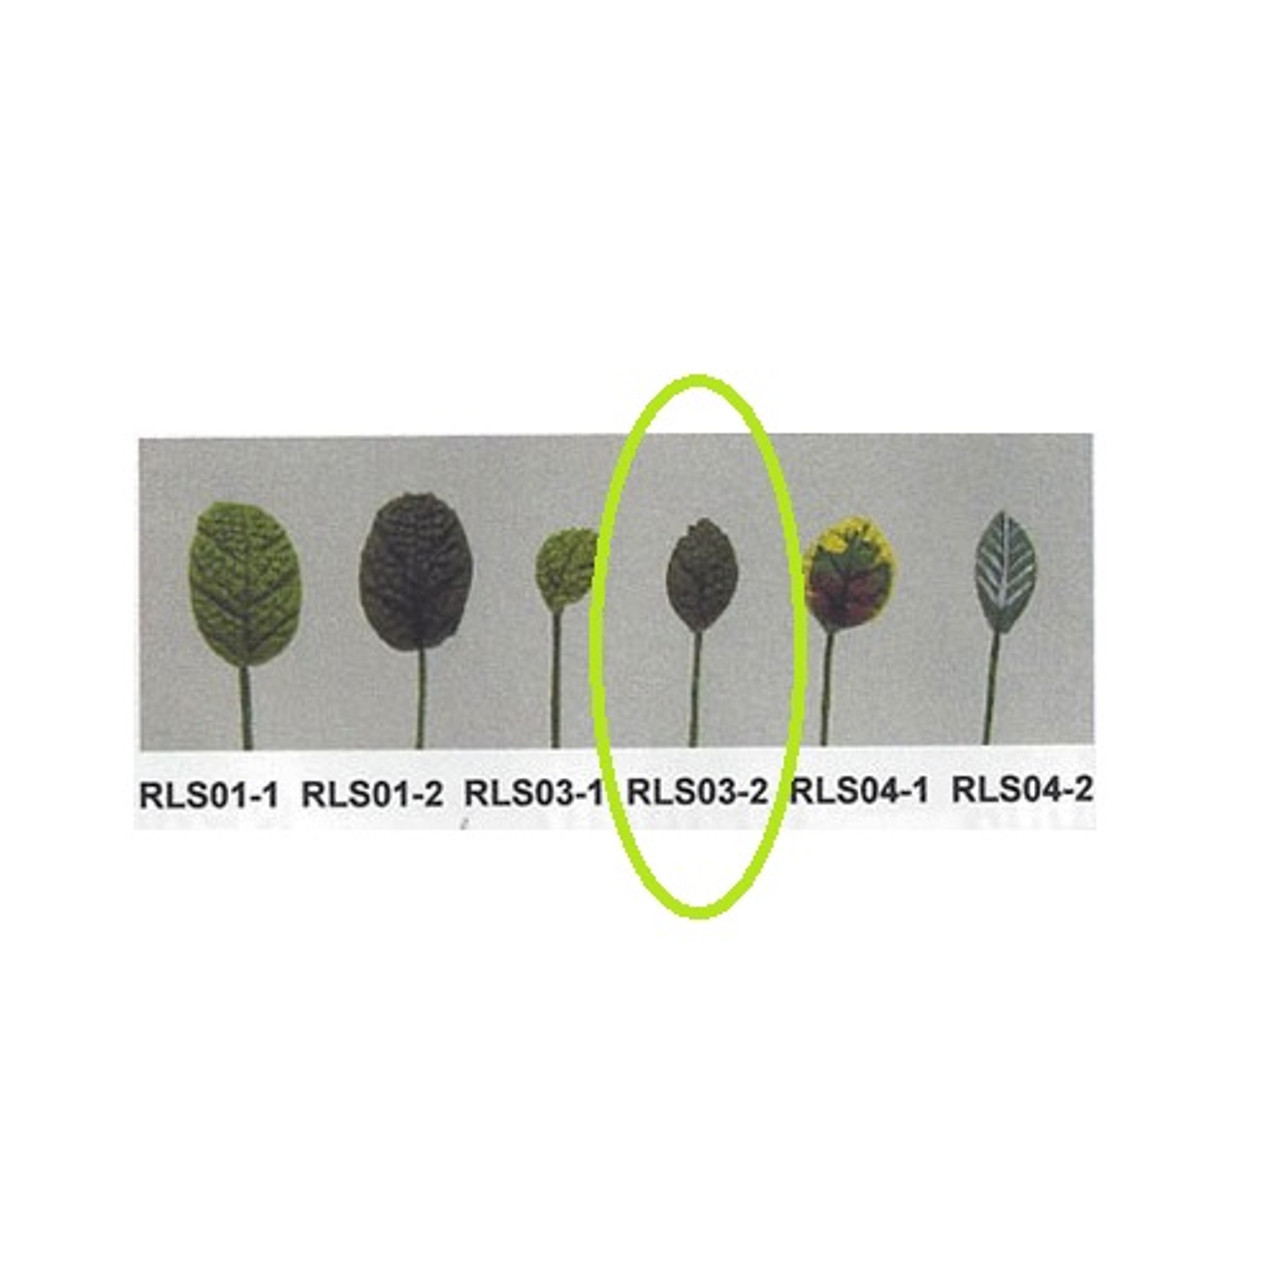 RLS03-2 - Package of 12 Small Rose Leaf Stems